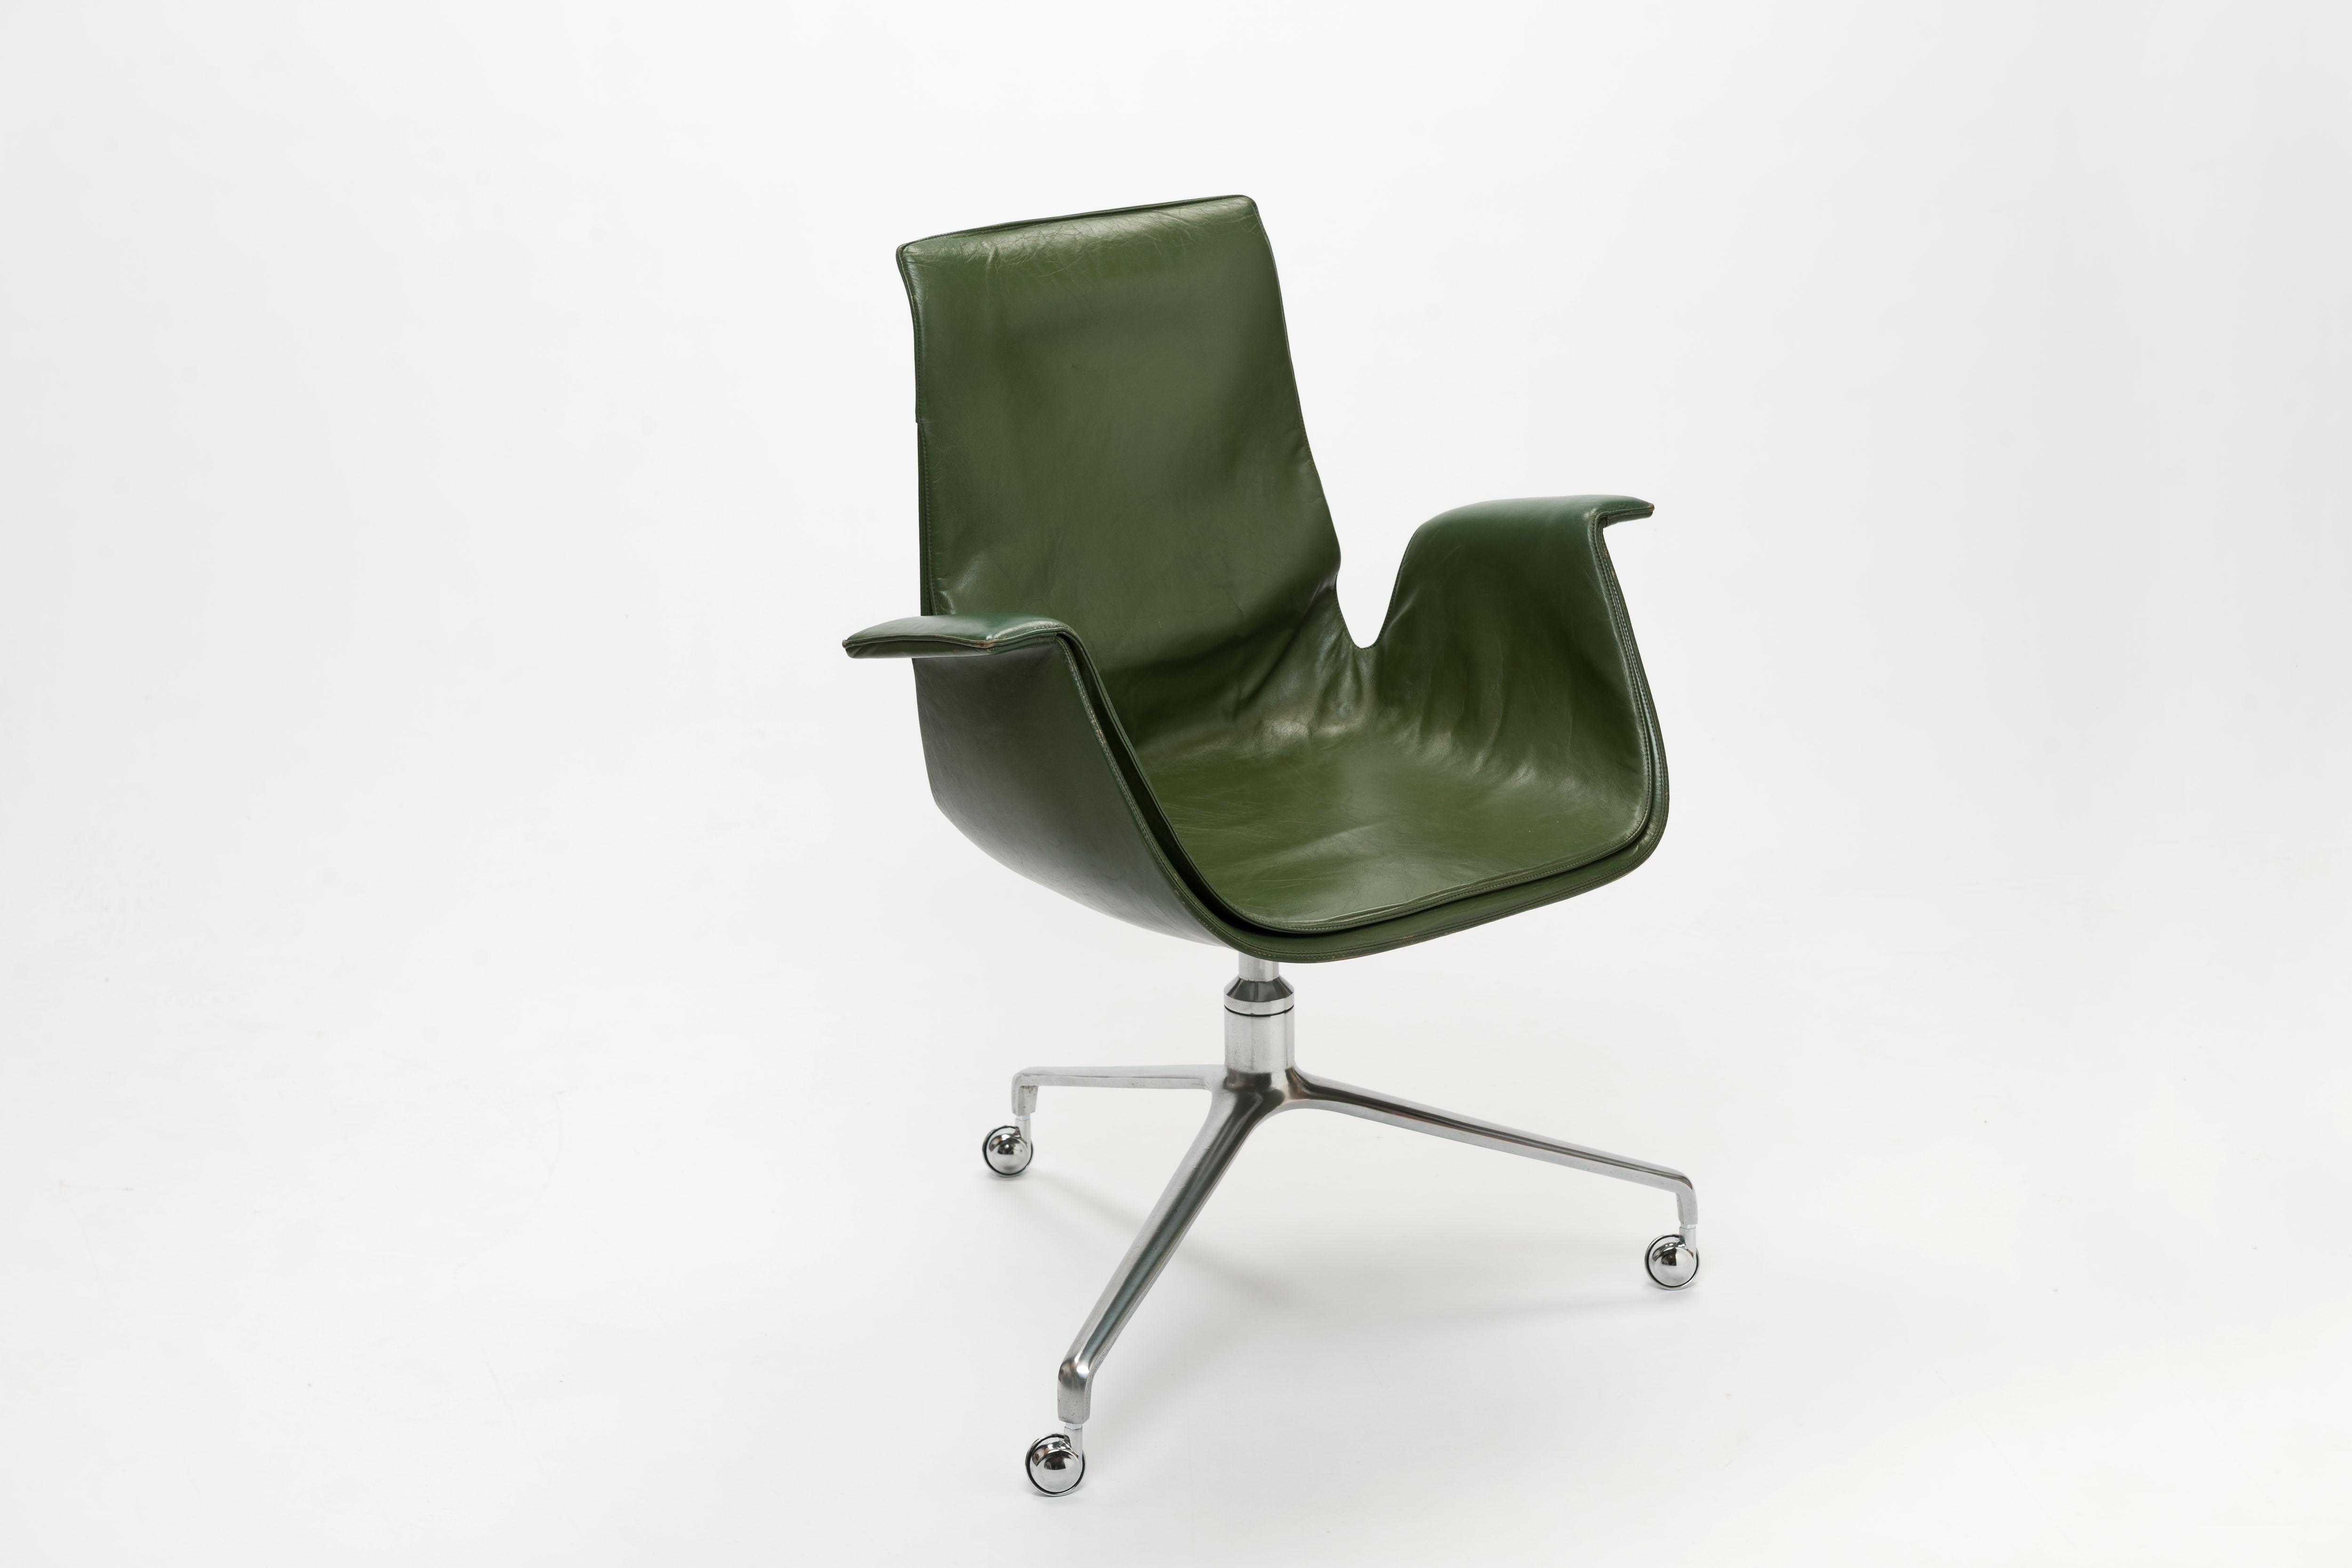 Tulip swivel desk chair by Danish designers Jørgen Kastholm & Preben Fabricius on signature three-legged base with metal casters, made by 1st manufacturer Alfred Kill. 
Very rare green color.

Measures: Height arm rests 70 cm / 27.55 inches, at